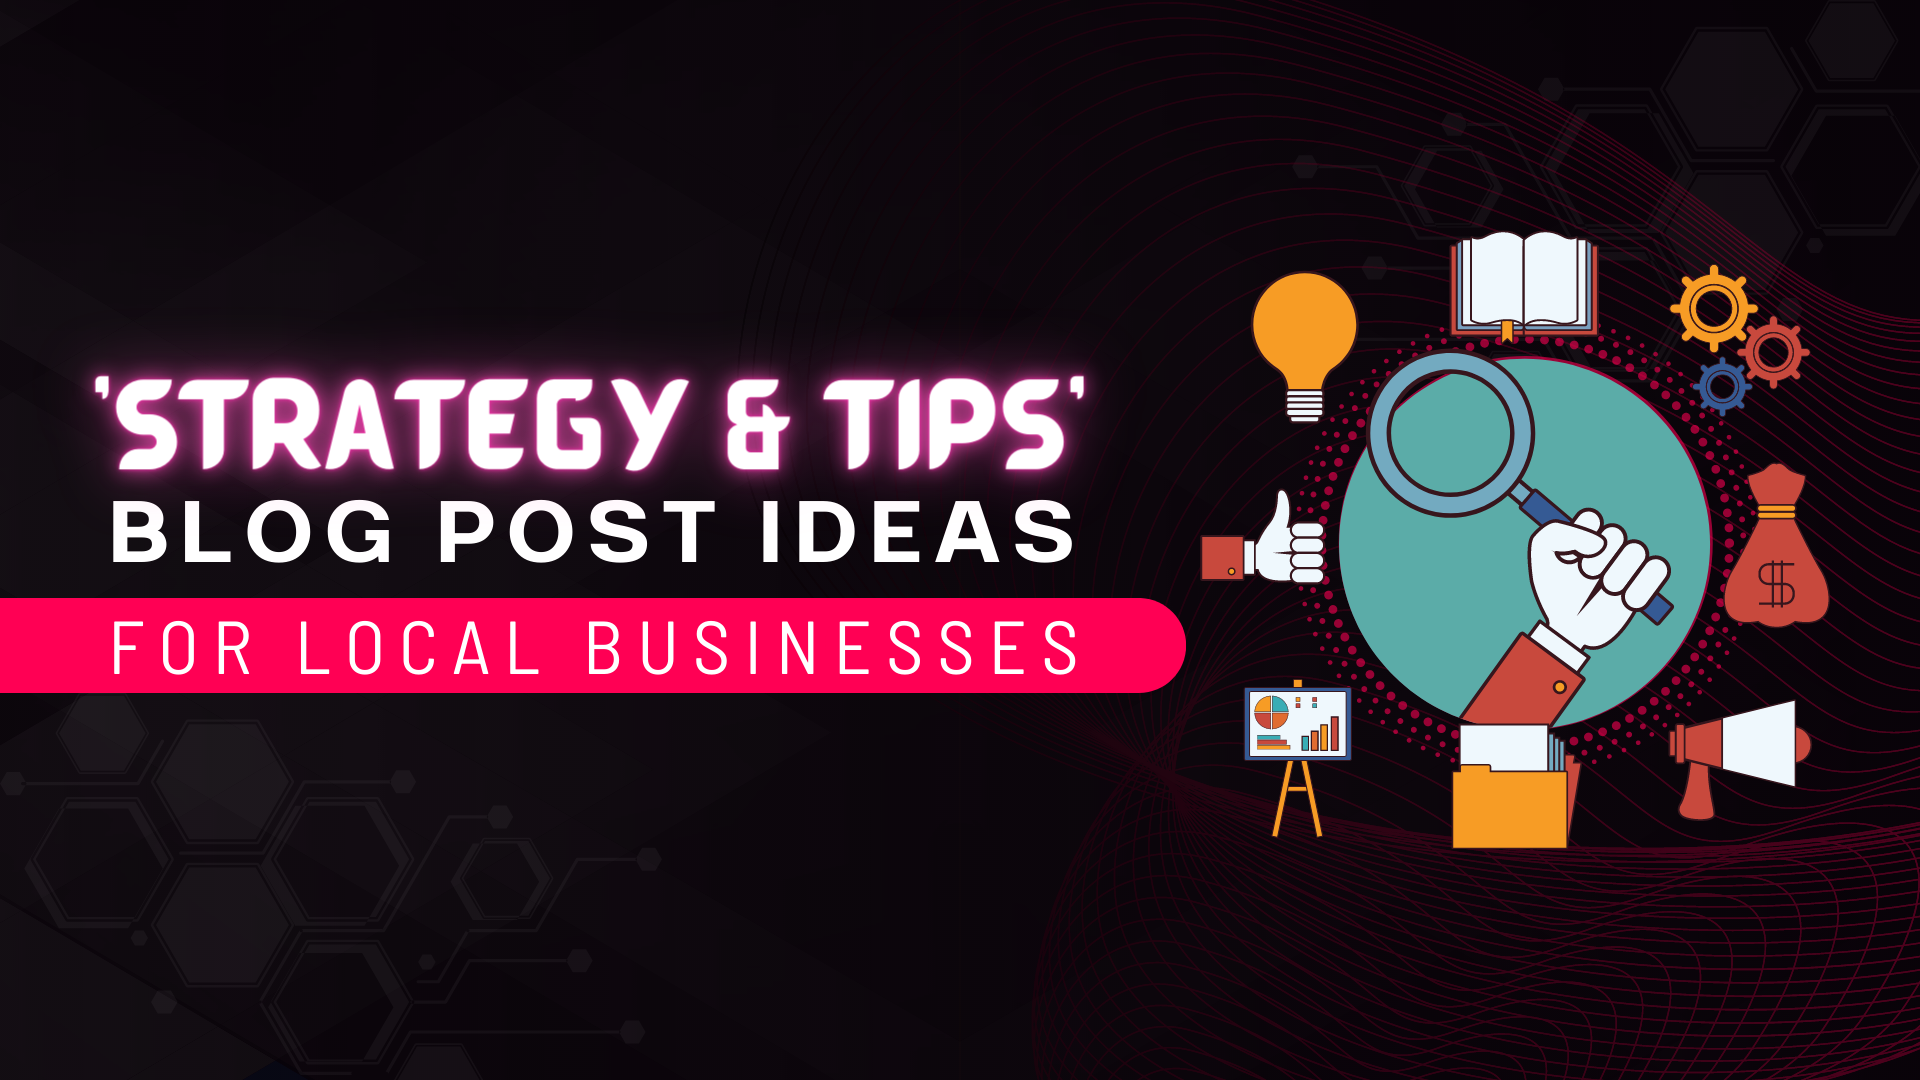 ‘Strategy & Tips’ Blog Post Ideas for Local Businesses